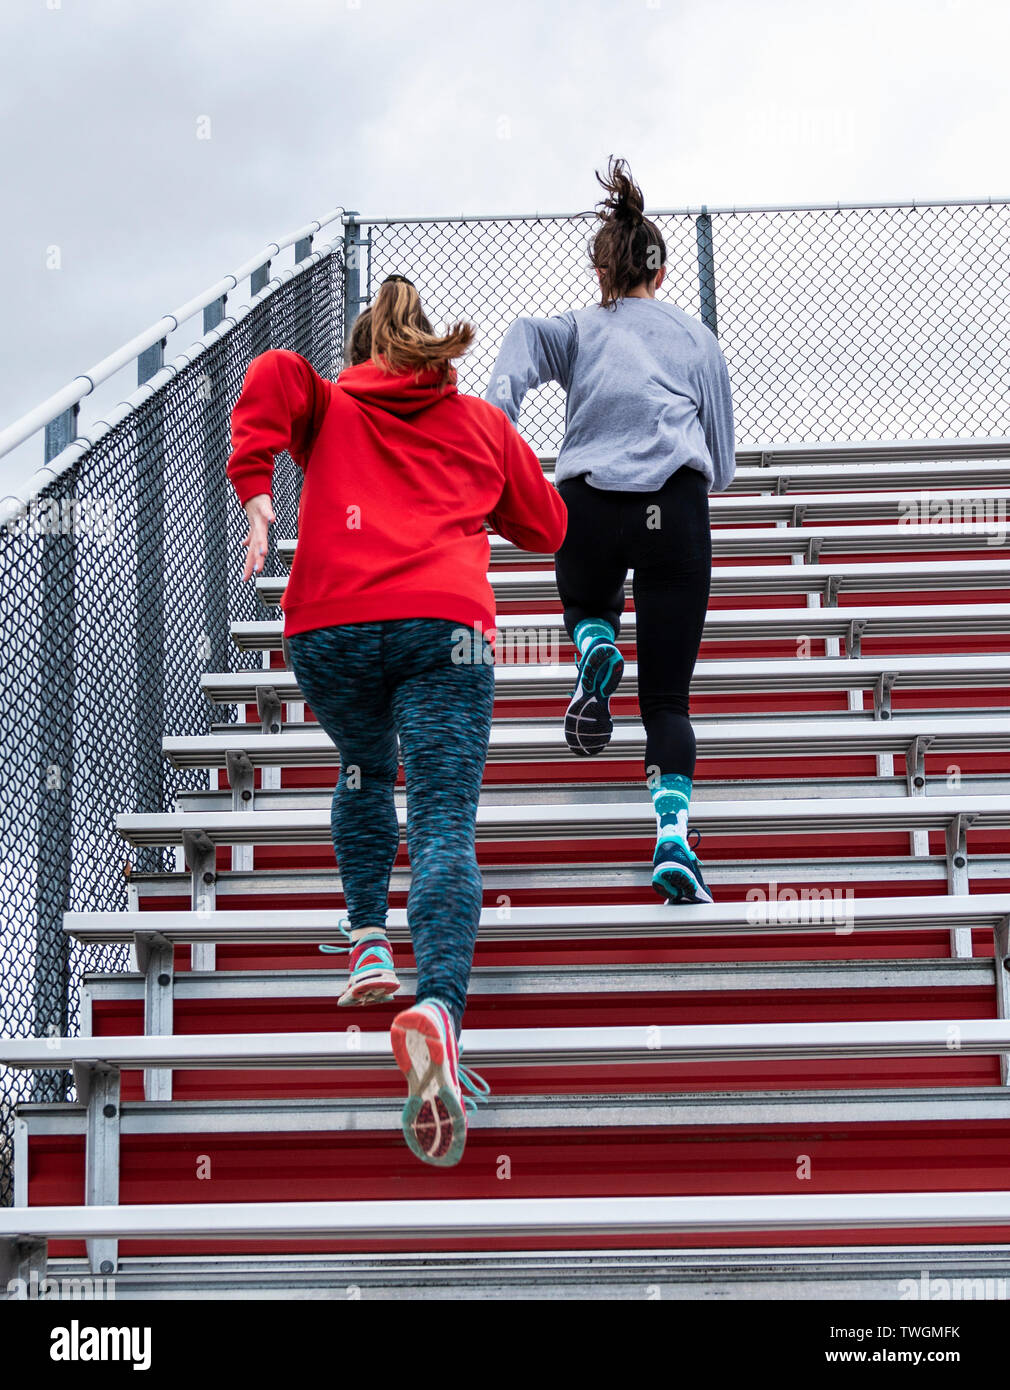 Two high school track and field runners are sprinting up red bleachers on a cloudy day at practice. Stock Photo